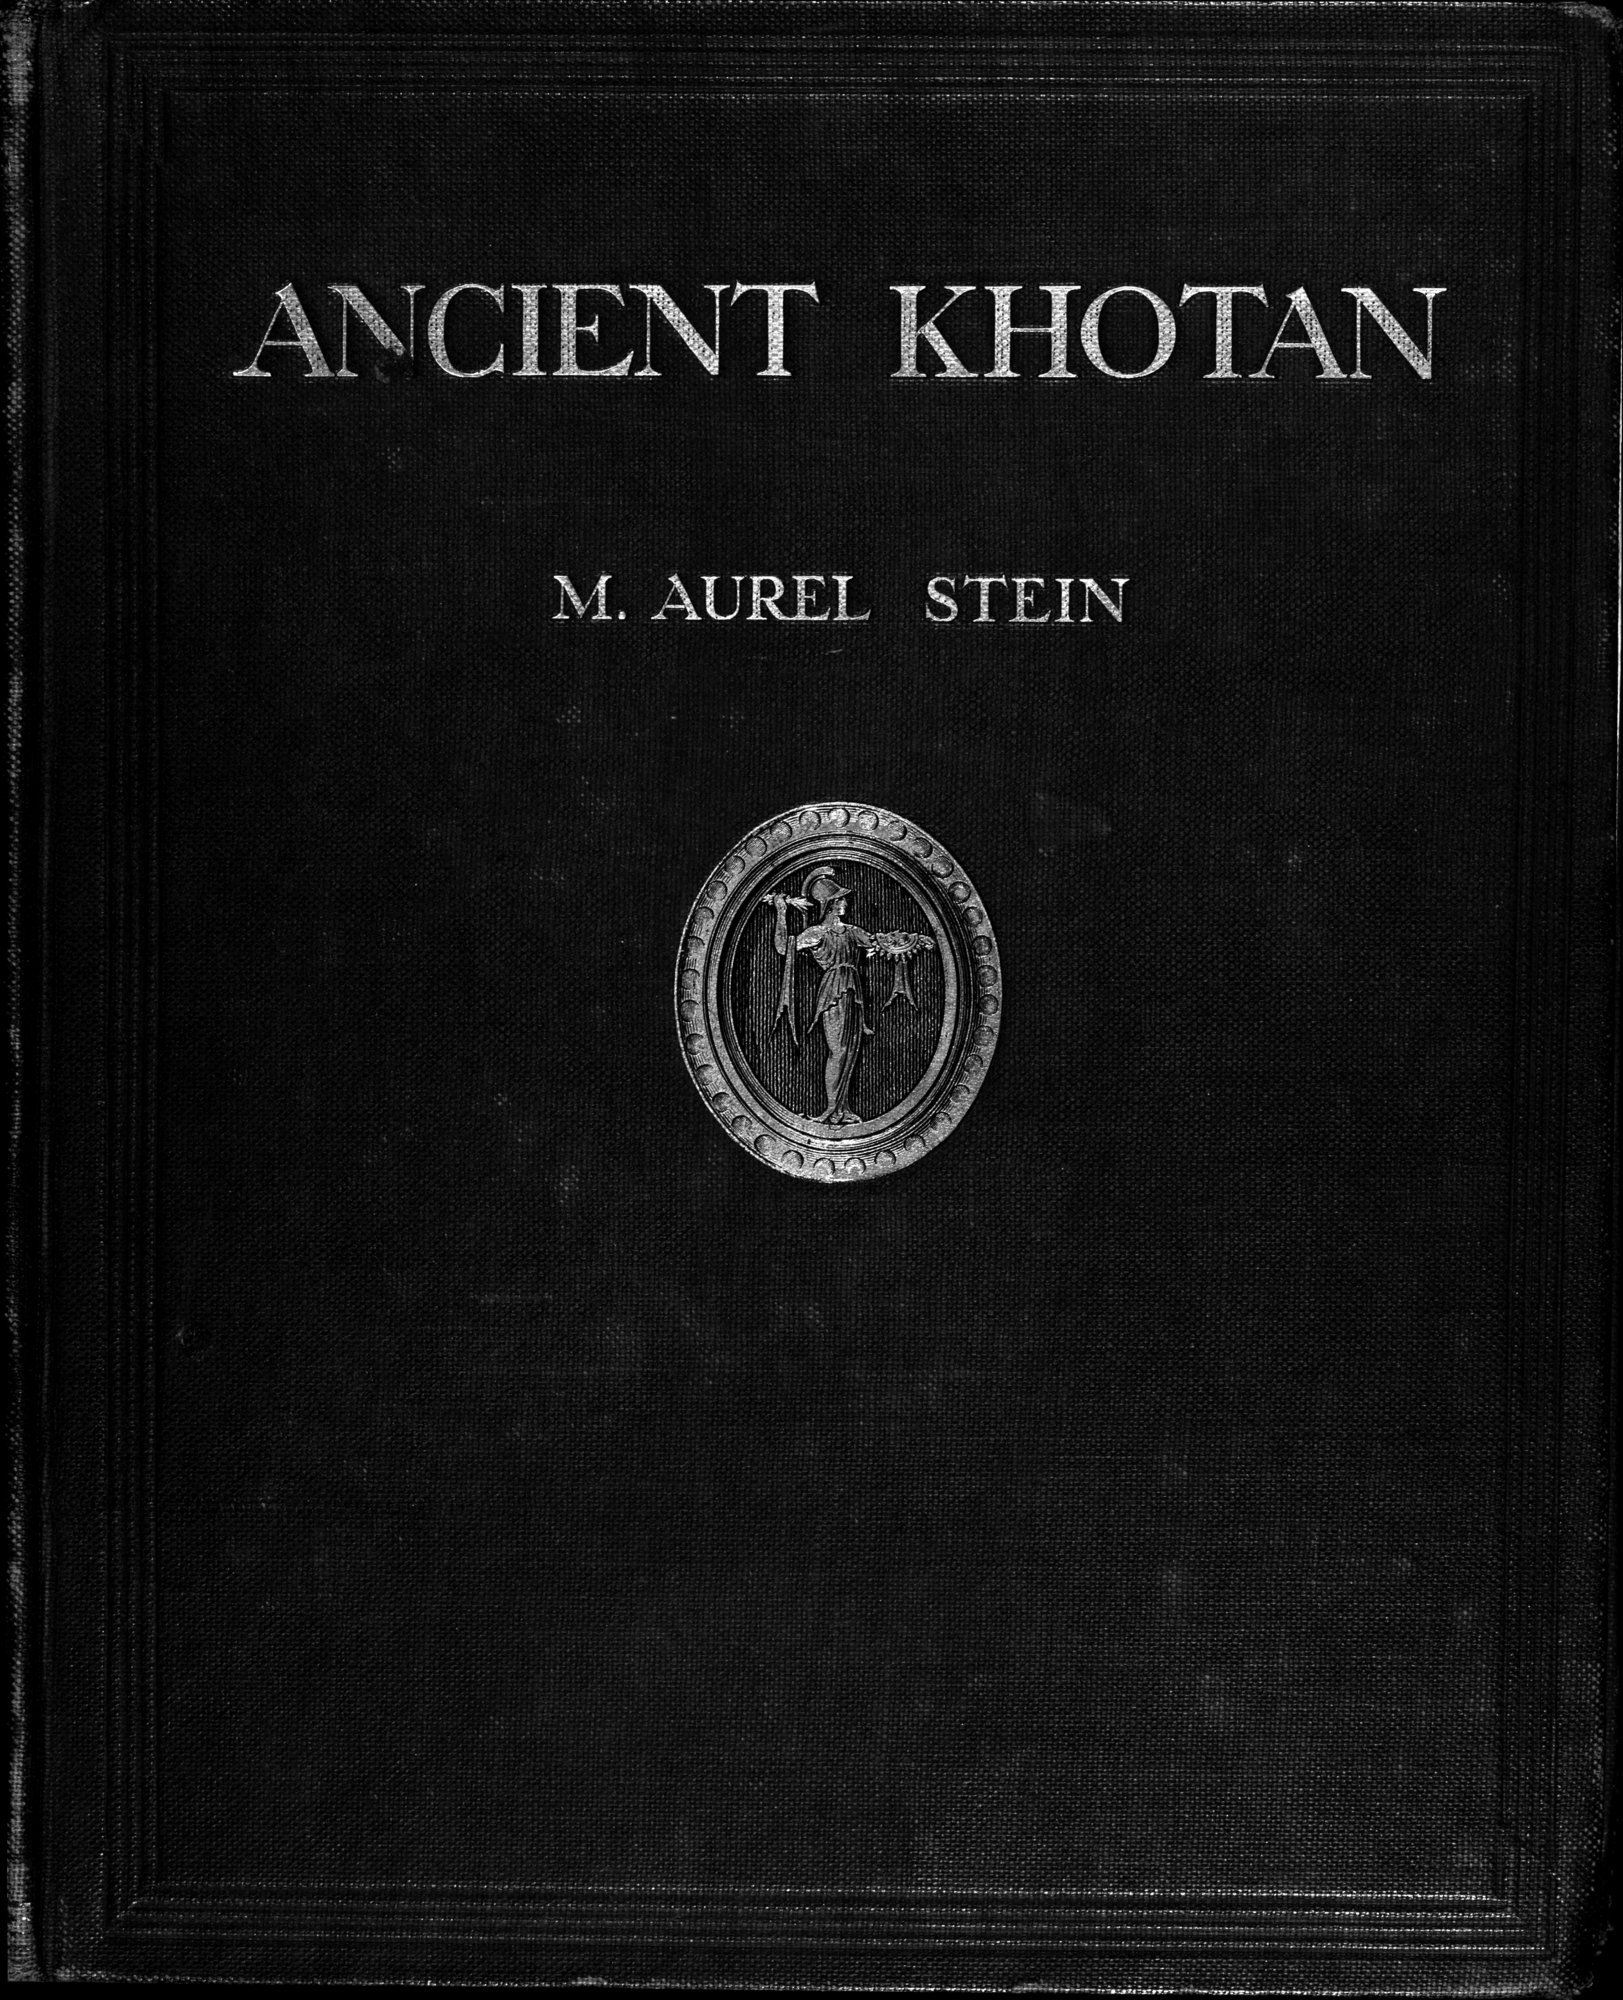 Ancient Khotan : vol.2 / Page 1 (Grayscale High Resolution Image)